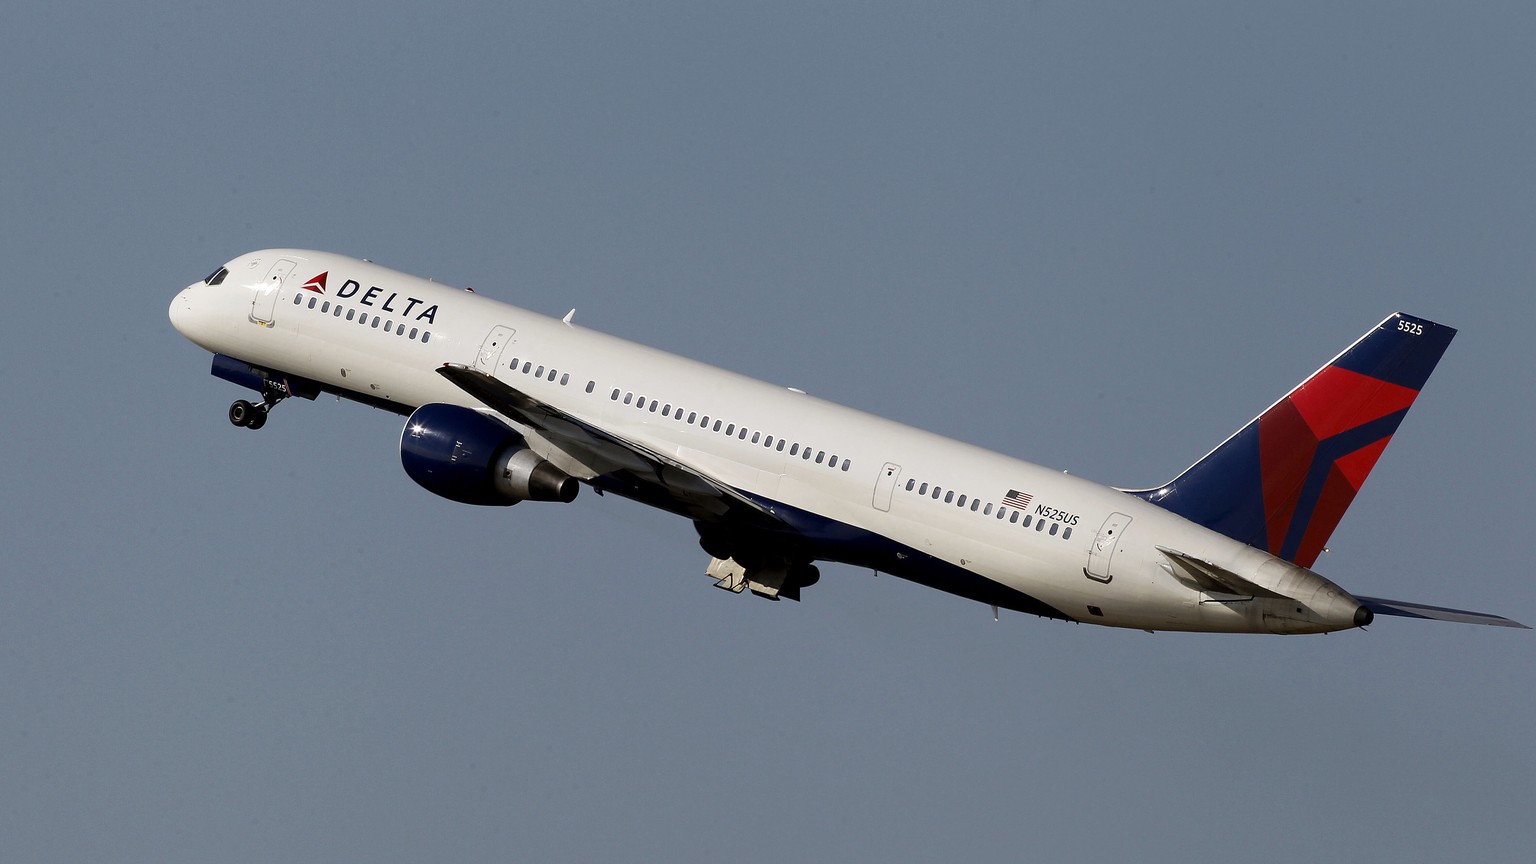 File-This photo taken Jan. 20, 2011, shows a Delta Airlines Boeing 757 taking off in Tampa, Fla. Delta Air Lines is making fundamental changes to its frequent flier program and will reward those who b ...